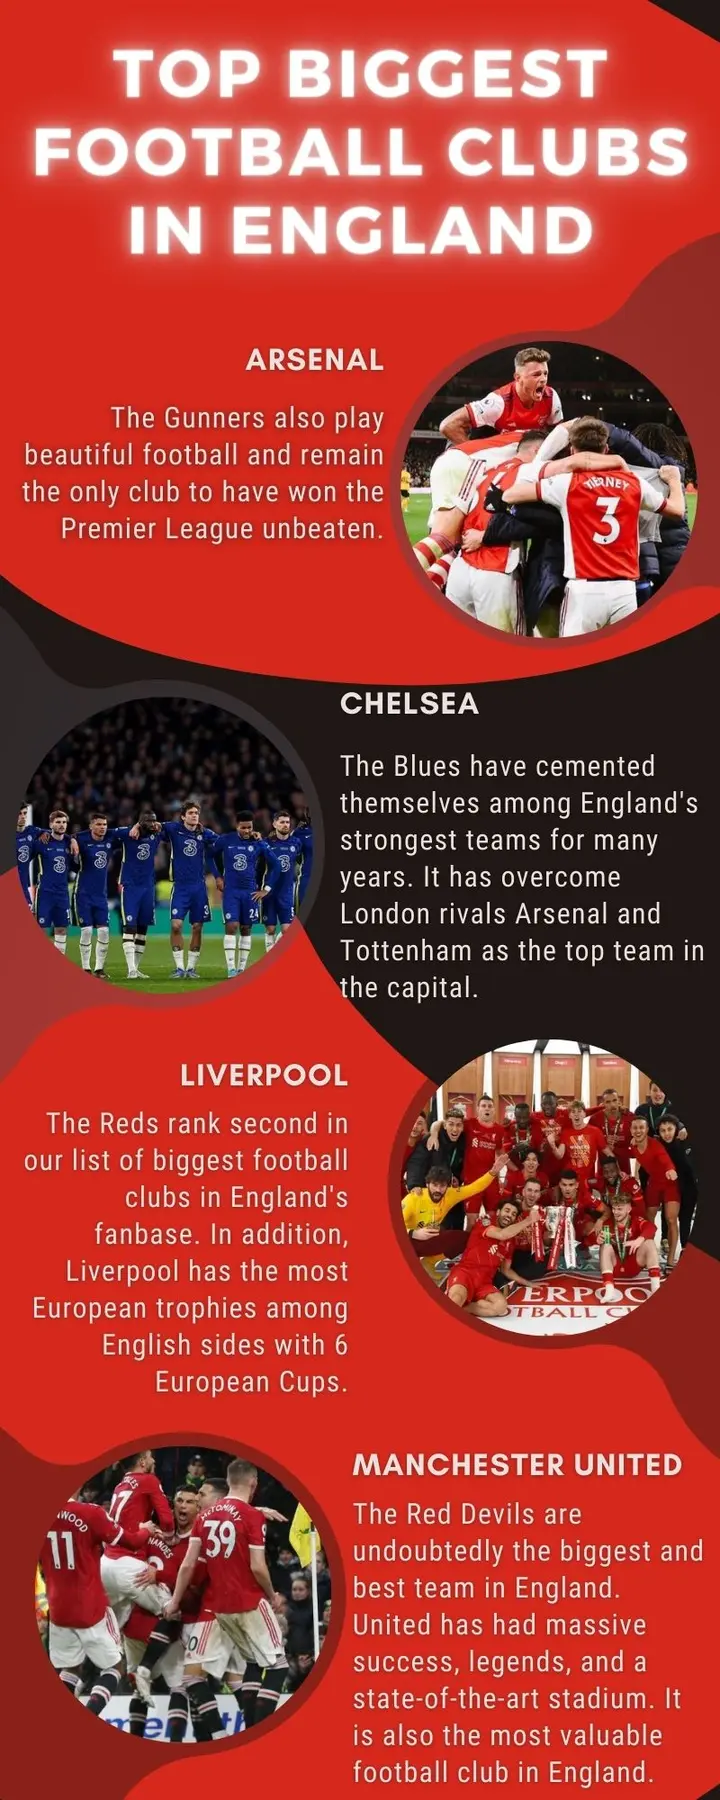 The biggest football clubs in England